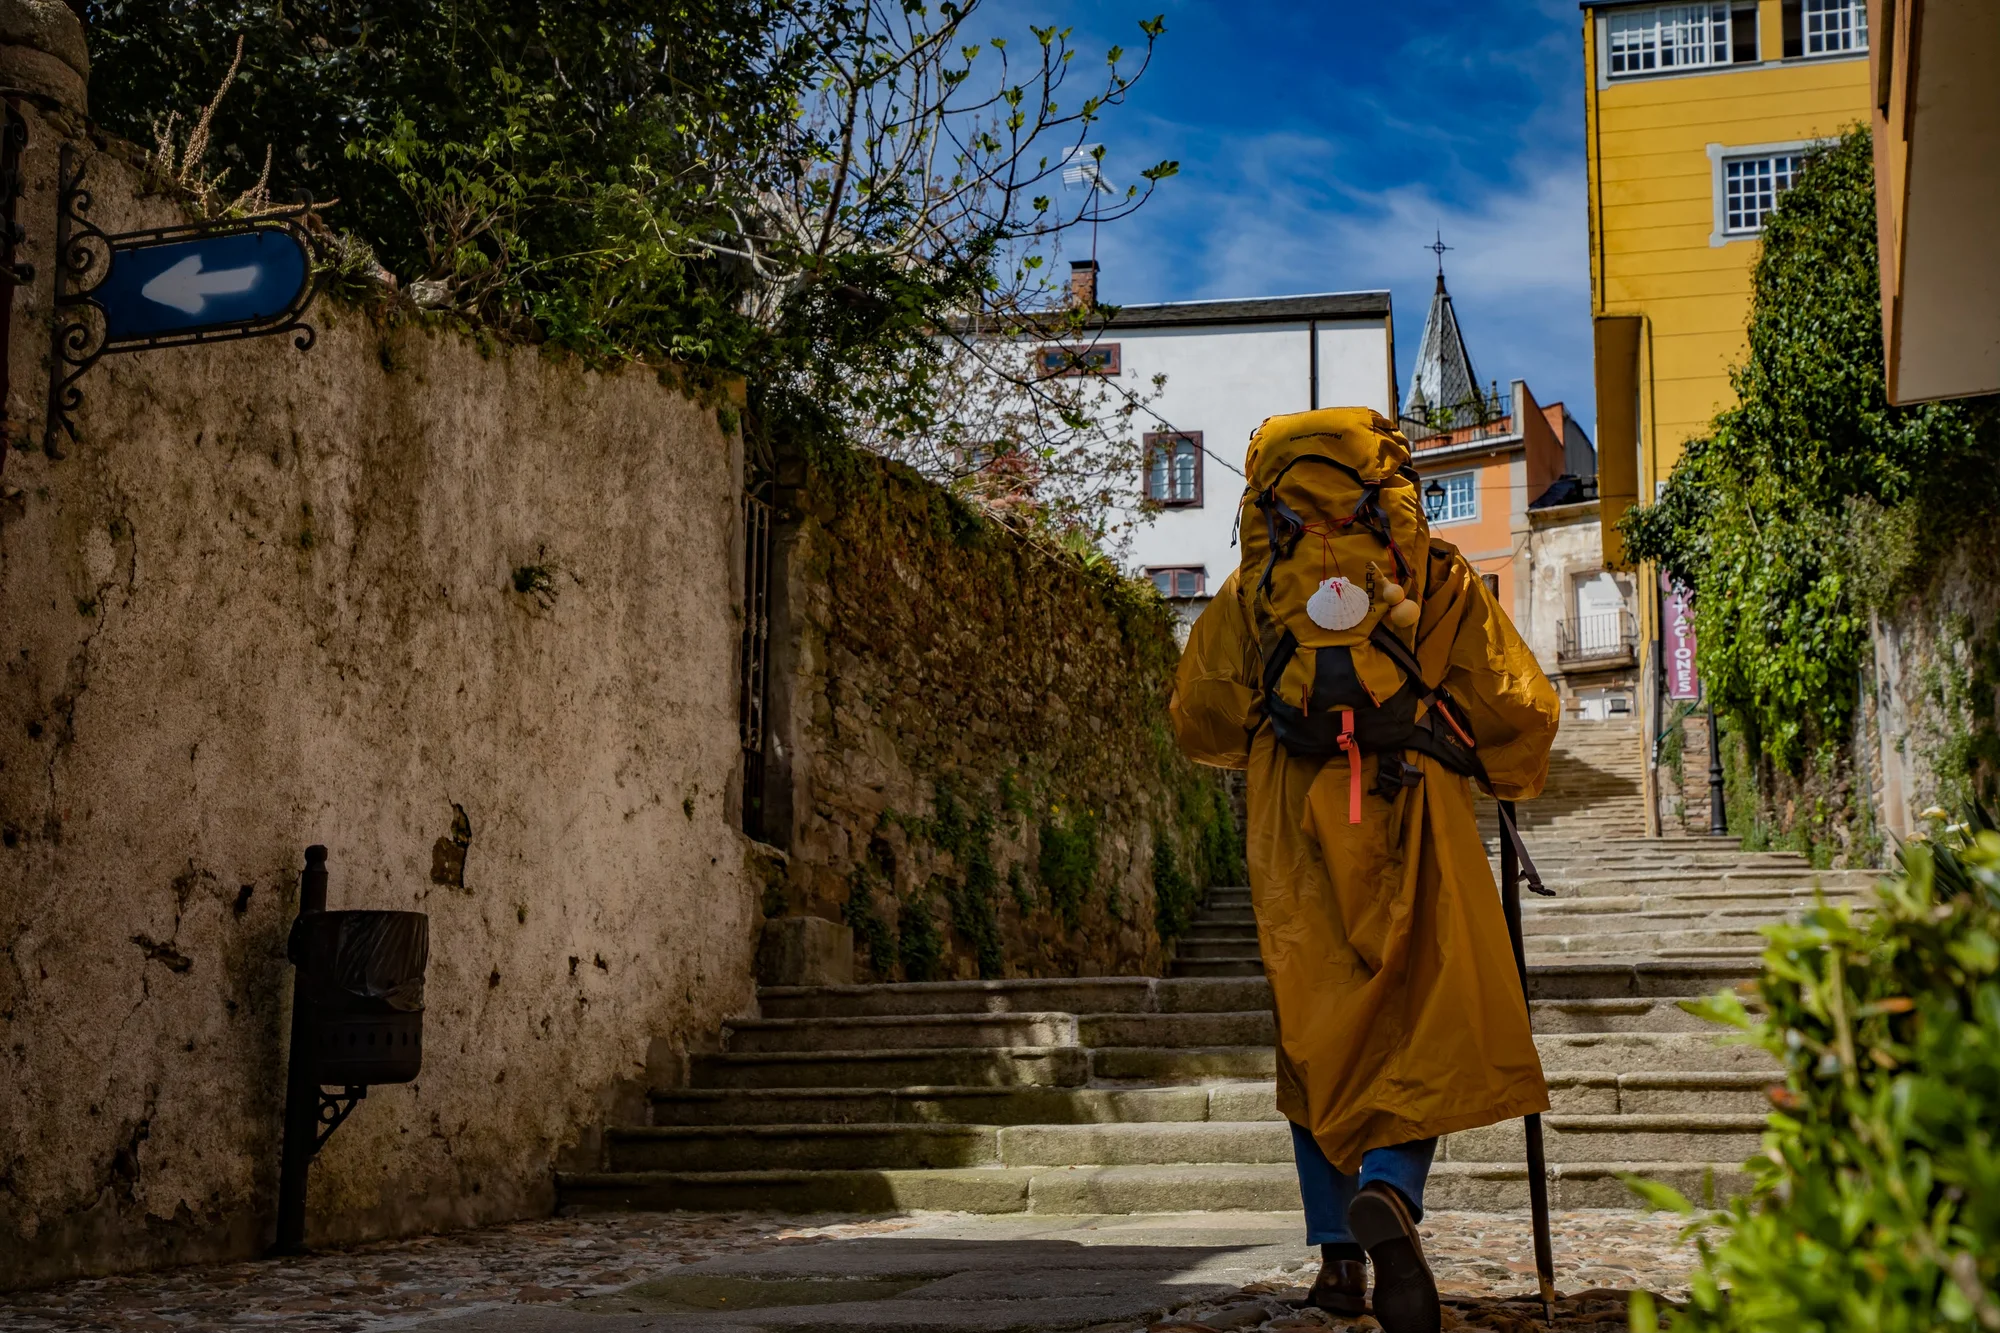 Photograph of a pilgrim with his back turned, wearing a yellow raincoat and a backpack. He is climbing some stairs on a narrow street.